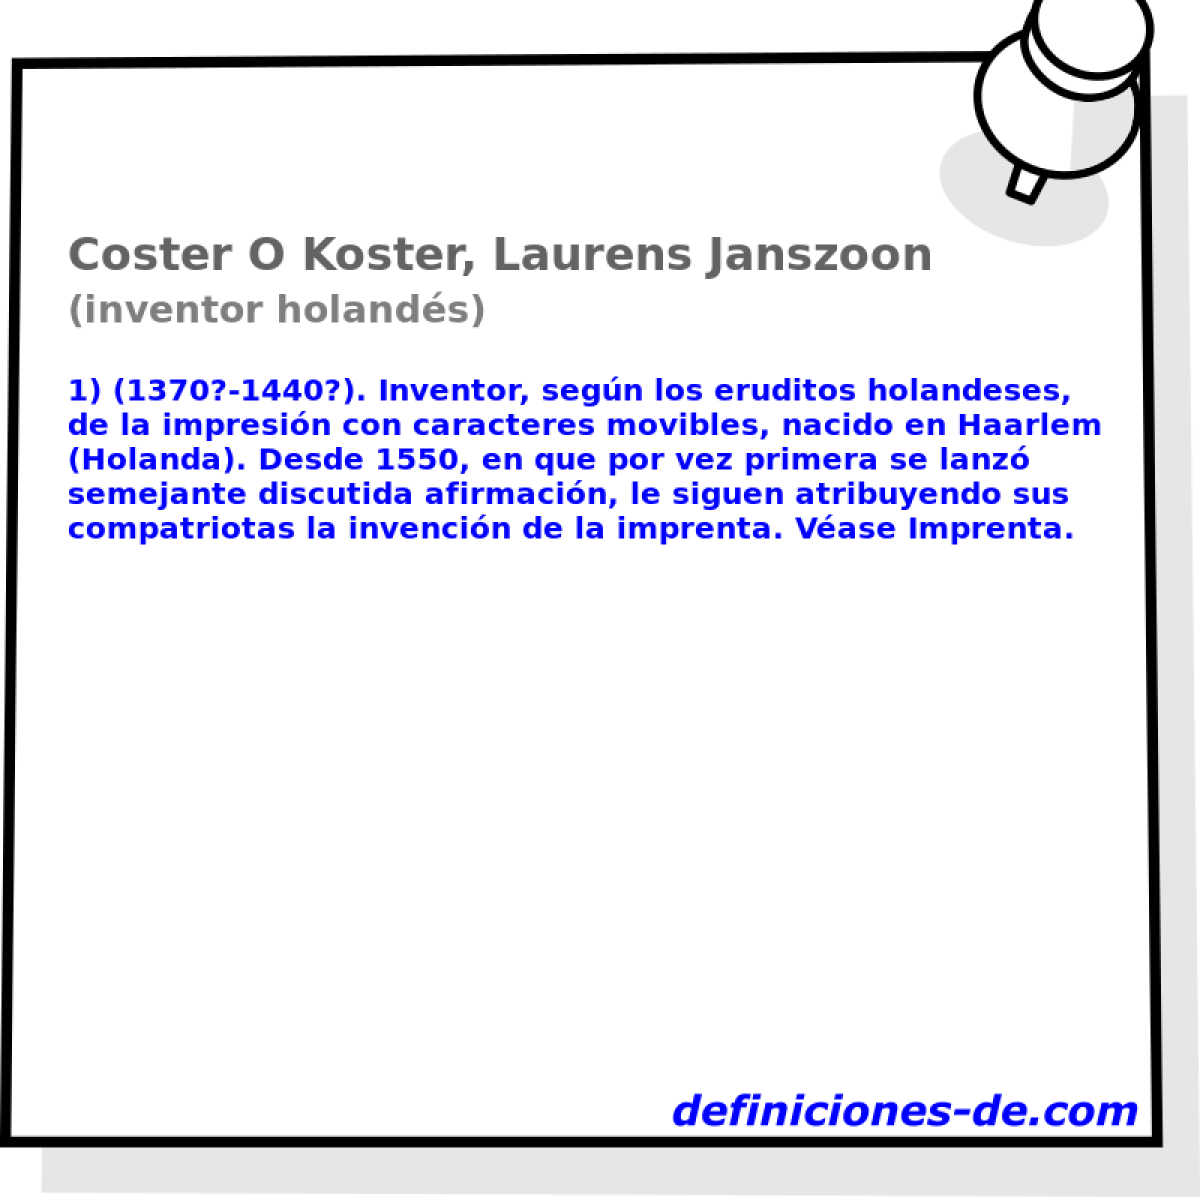 Coster O Koster, Laurens Janszoon (inventor holands)